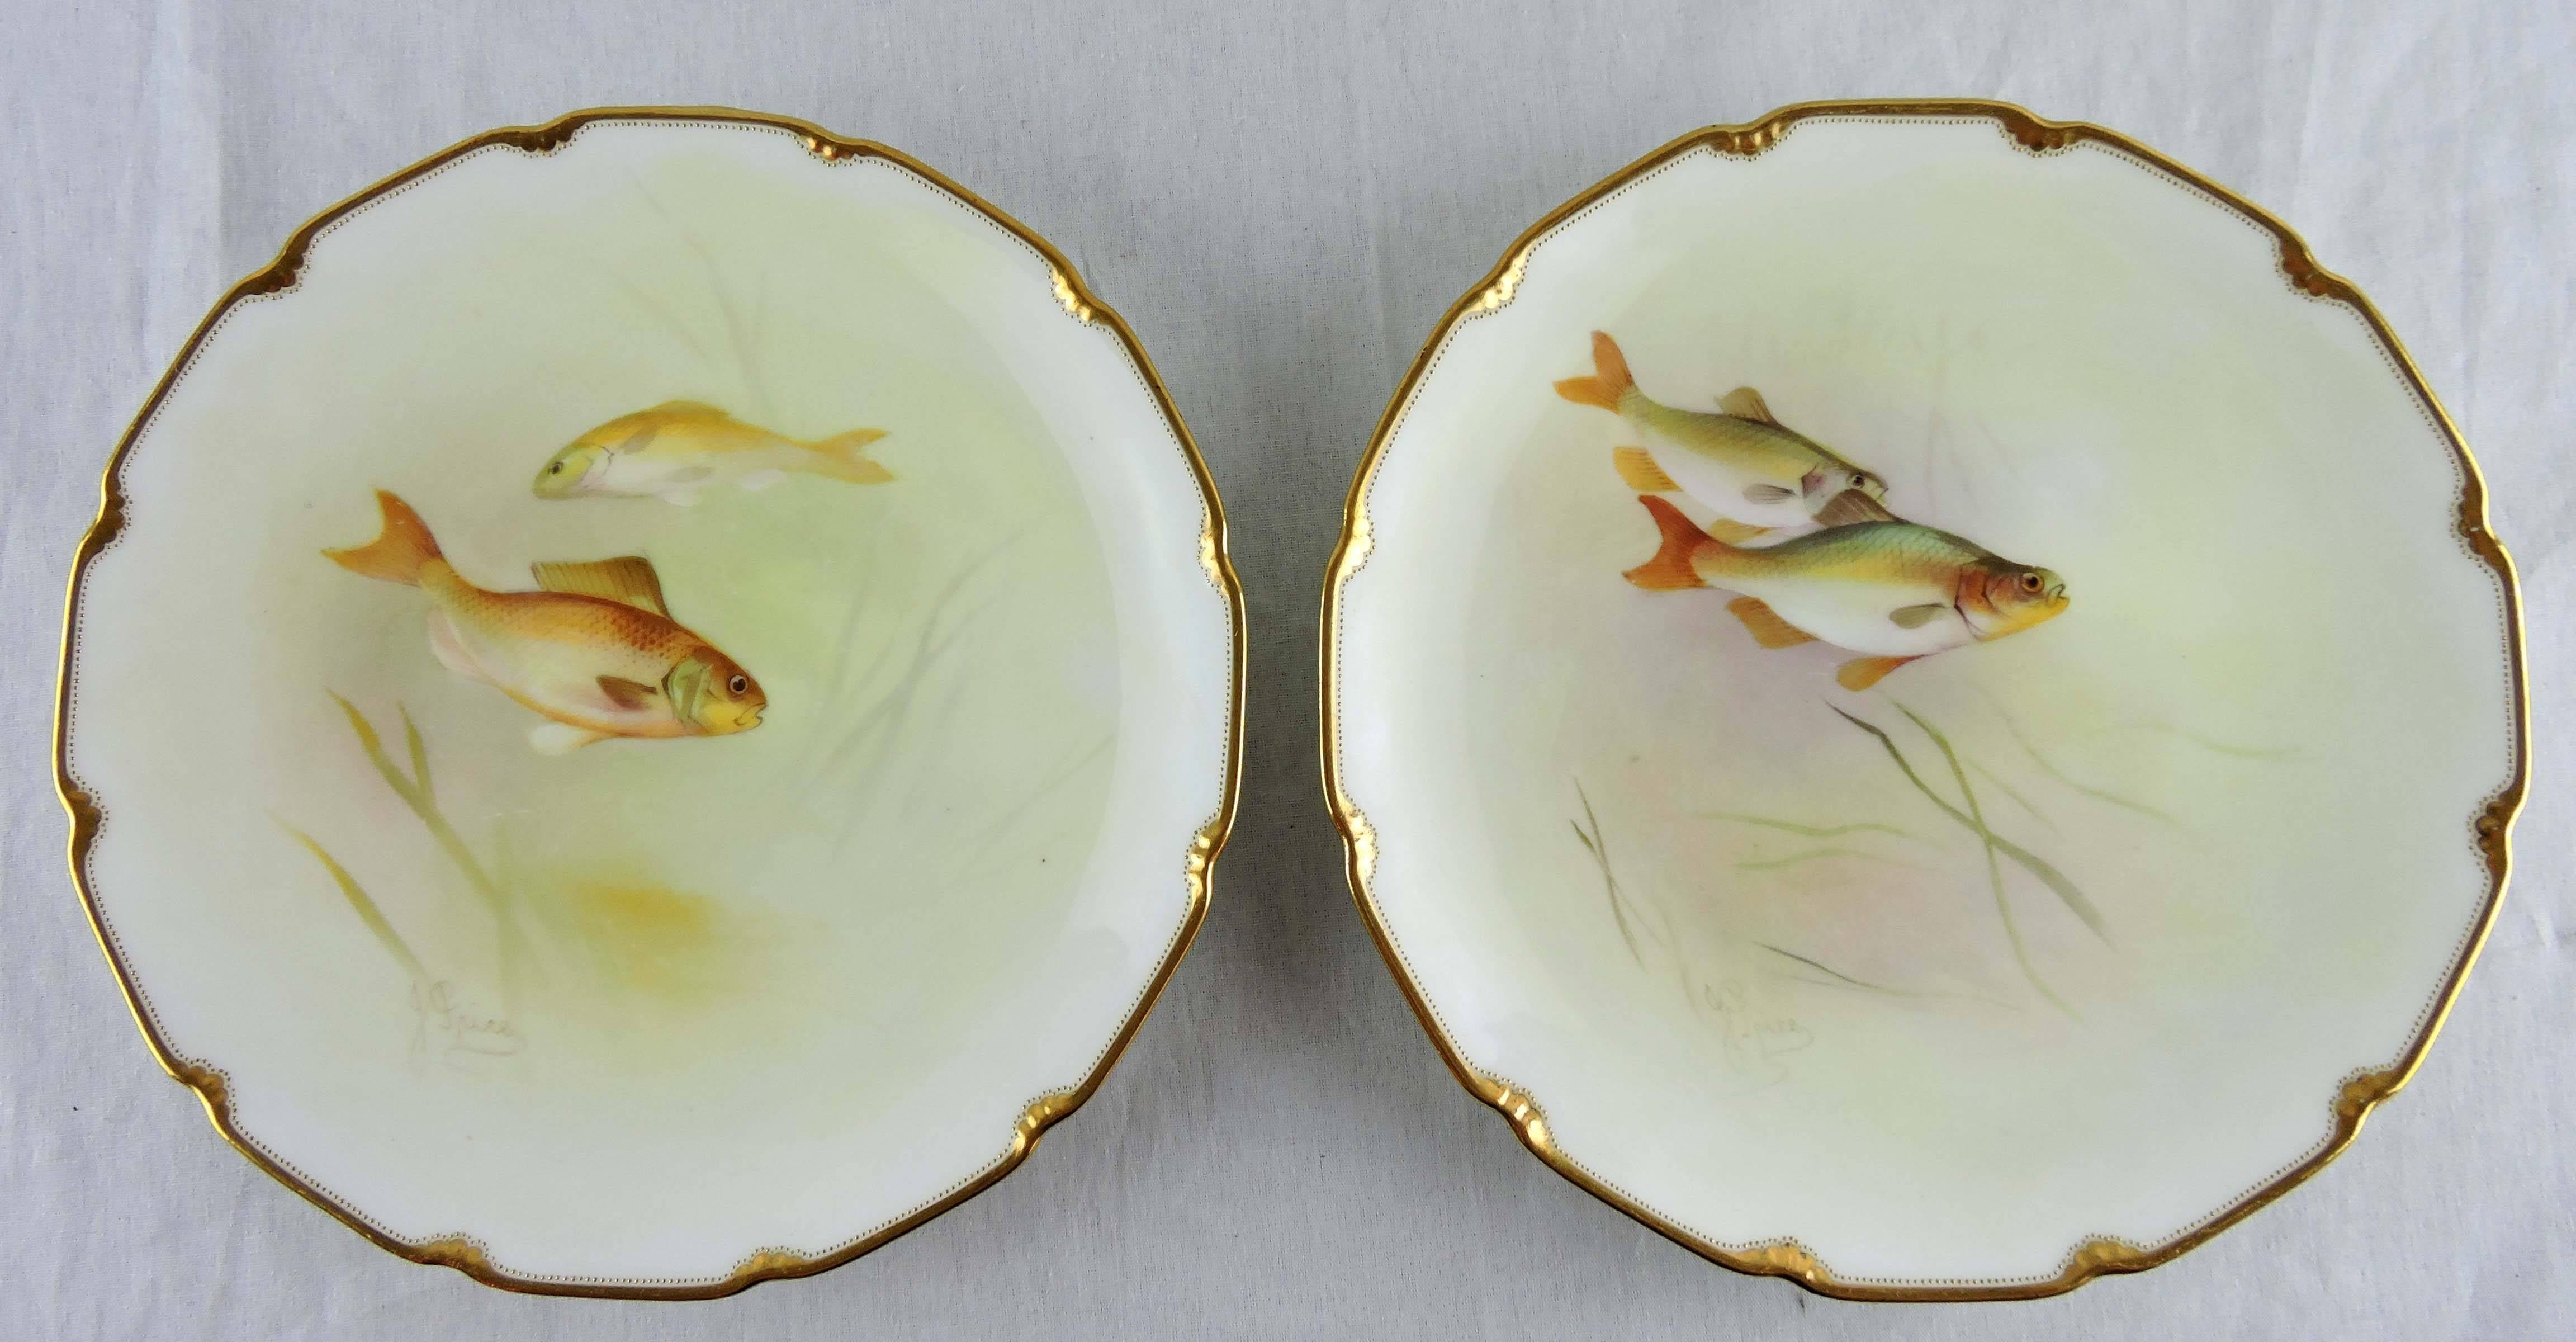 This is a hand-painted set of eight Royal Doulton, decorated with images of fresh water fish in their native habitats, replete with underwater botanicals. Species depicted include: Salmon, Roach, Smelts, Trout, Rudd and Crucian Carp.

The plates